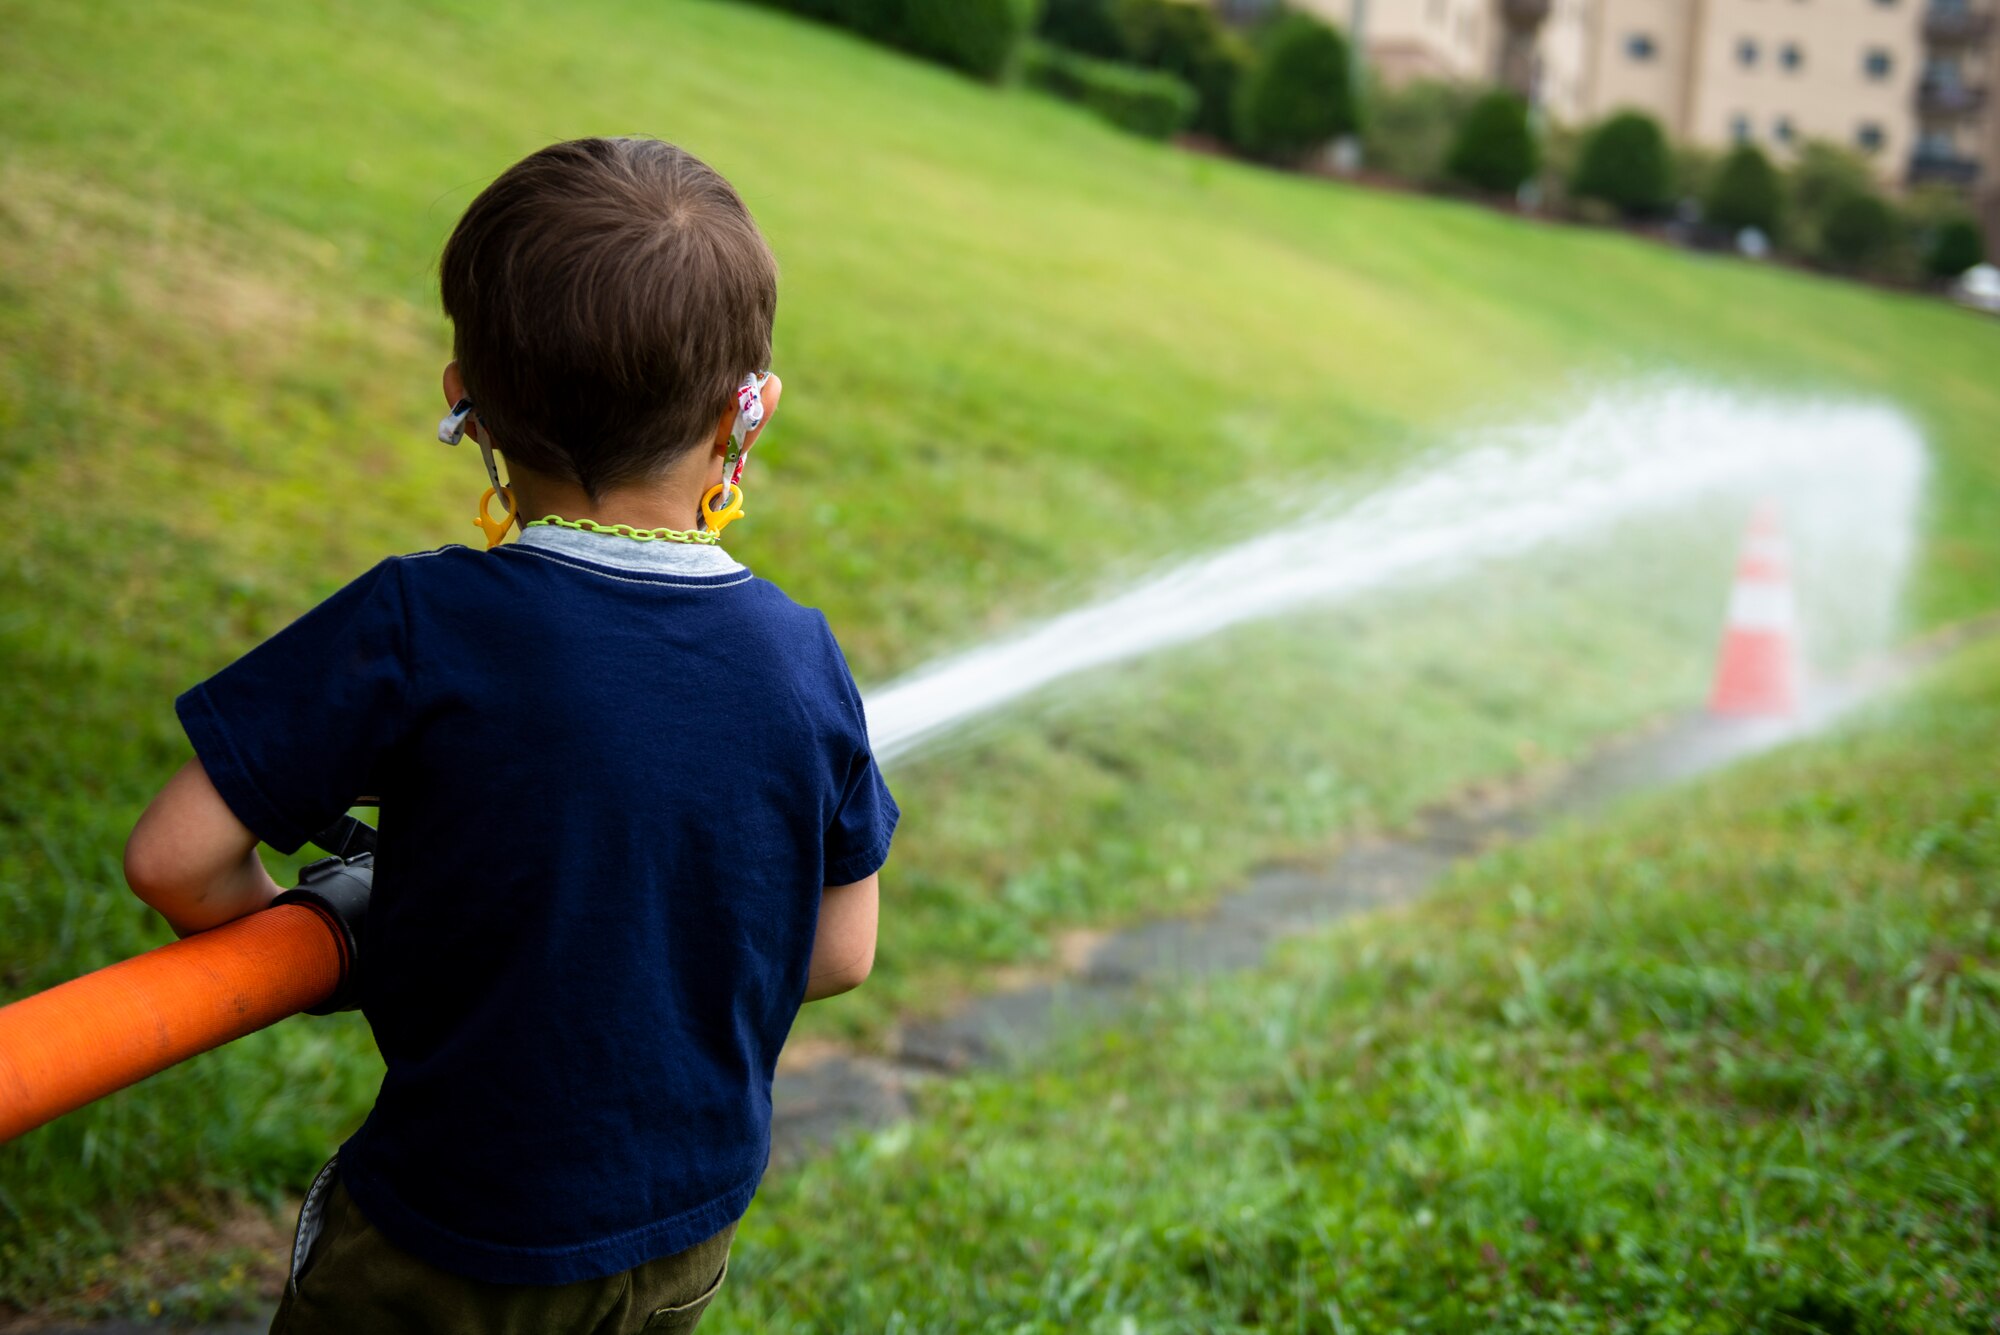 A child attendee uses a fire hose during the Fire Prevention Week’s Kids Showcase